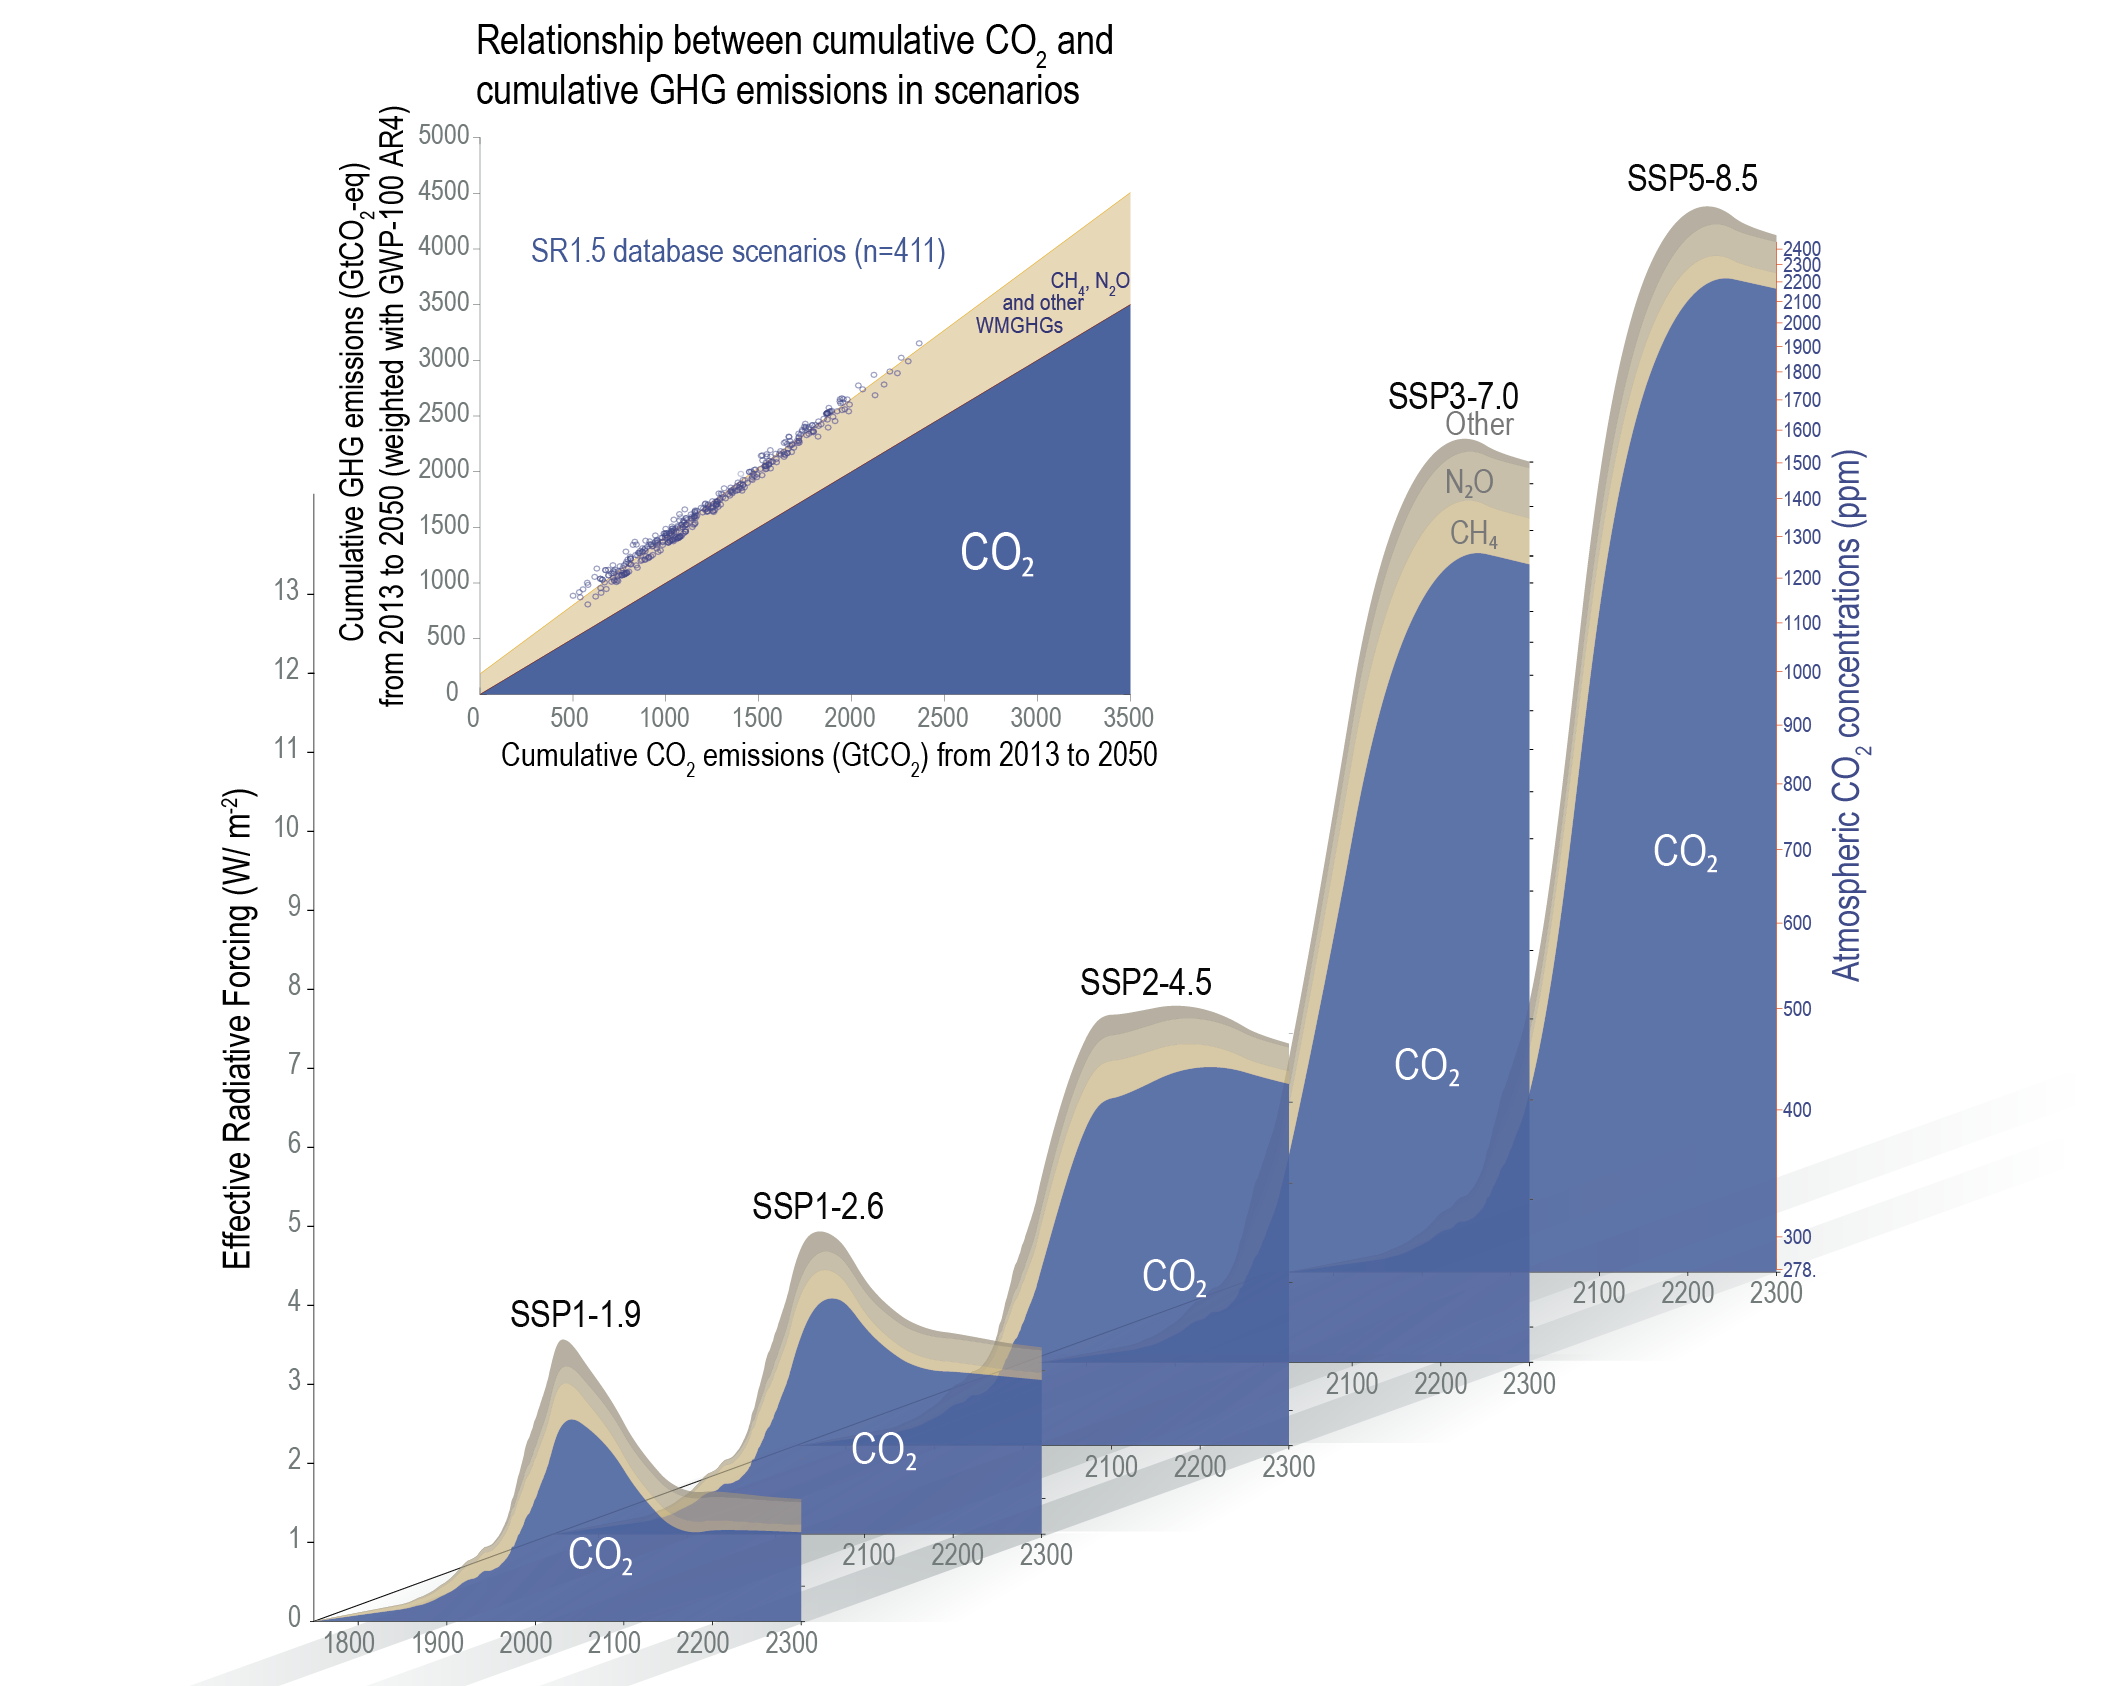 Radiative Forcing and CO2 Concentrations for IPCC SSP Emission Scenarios